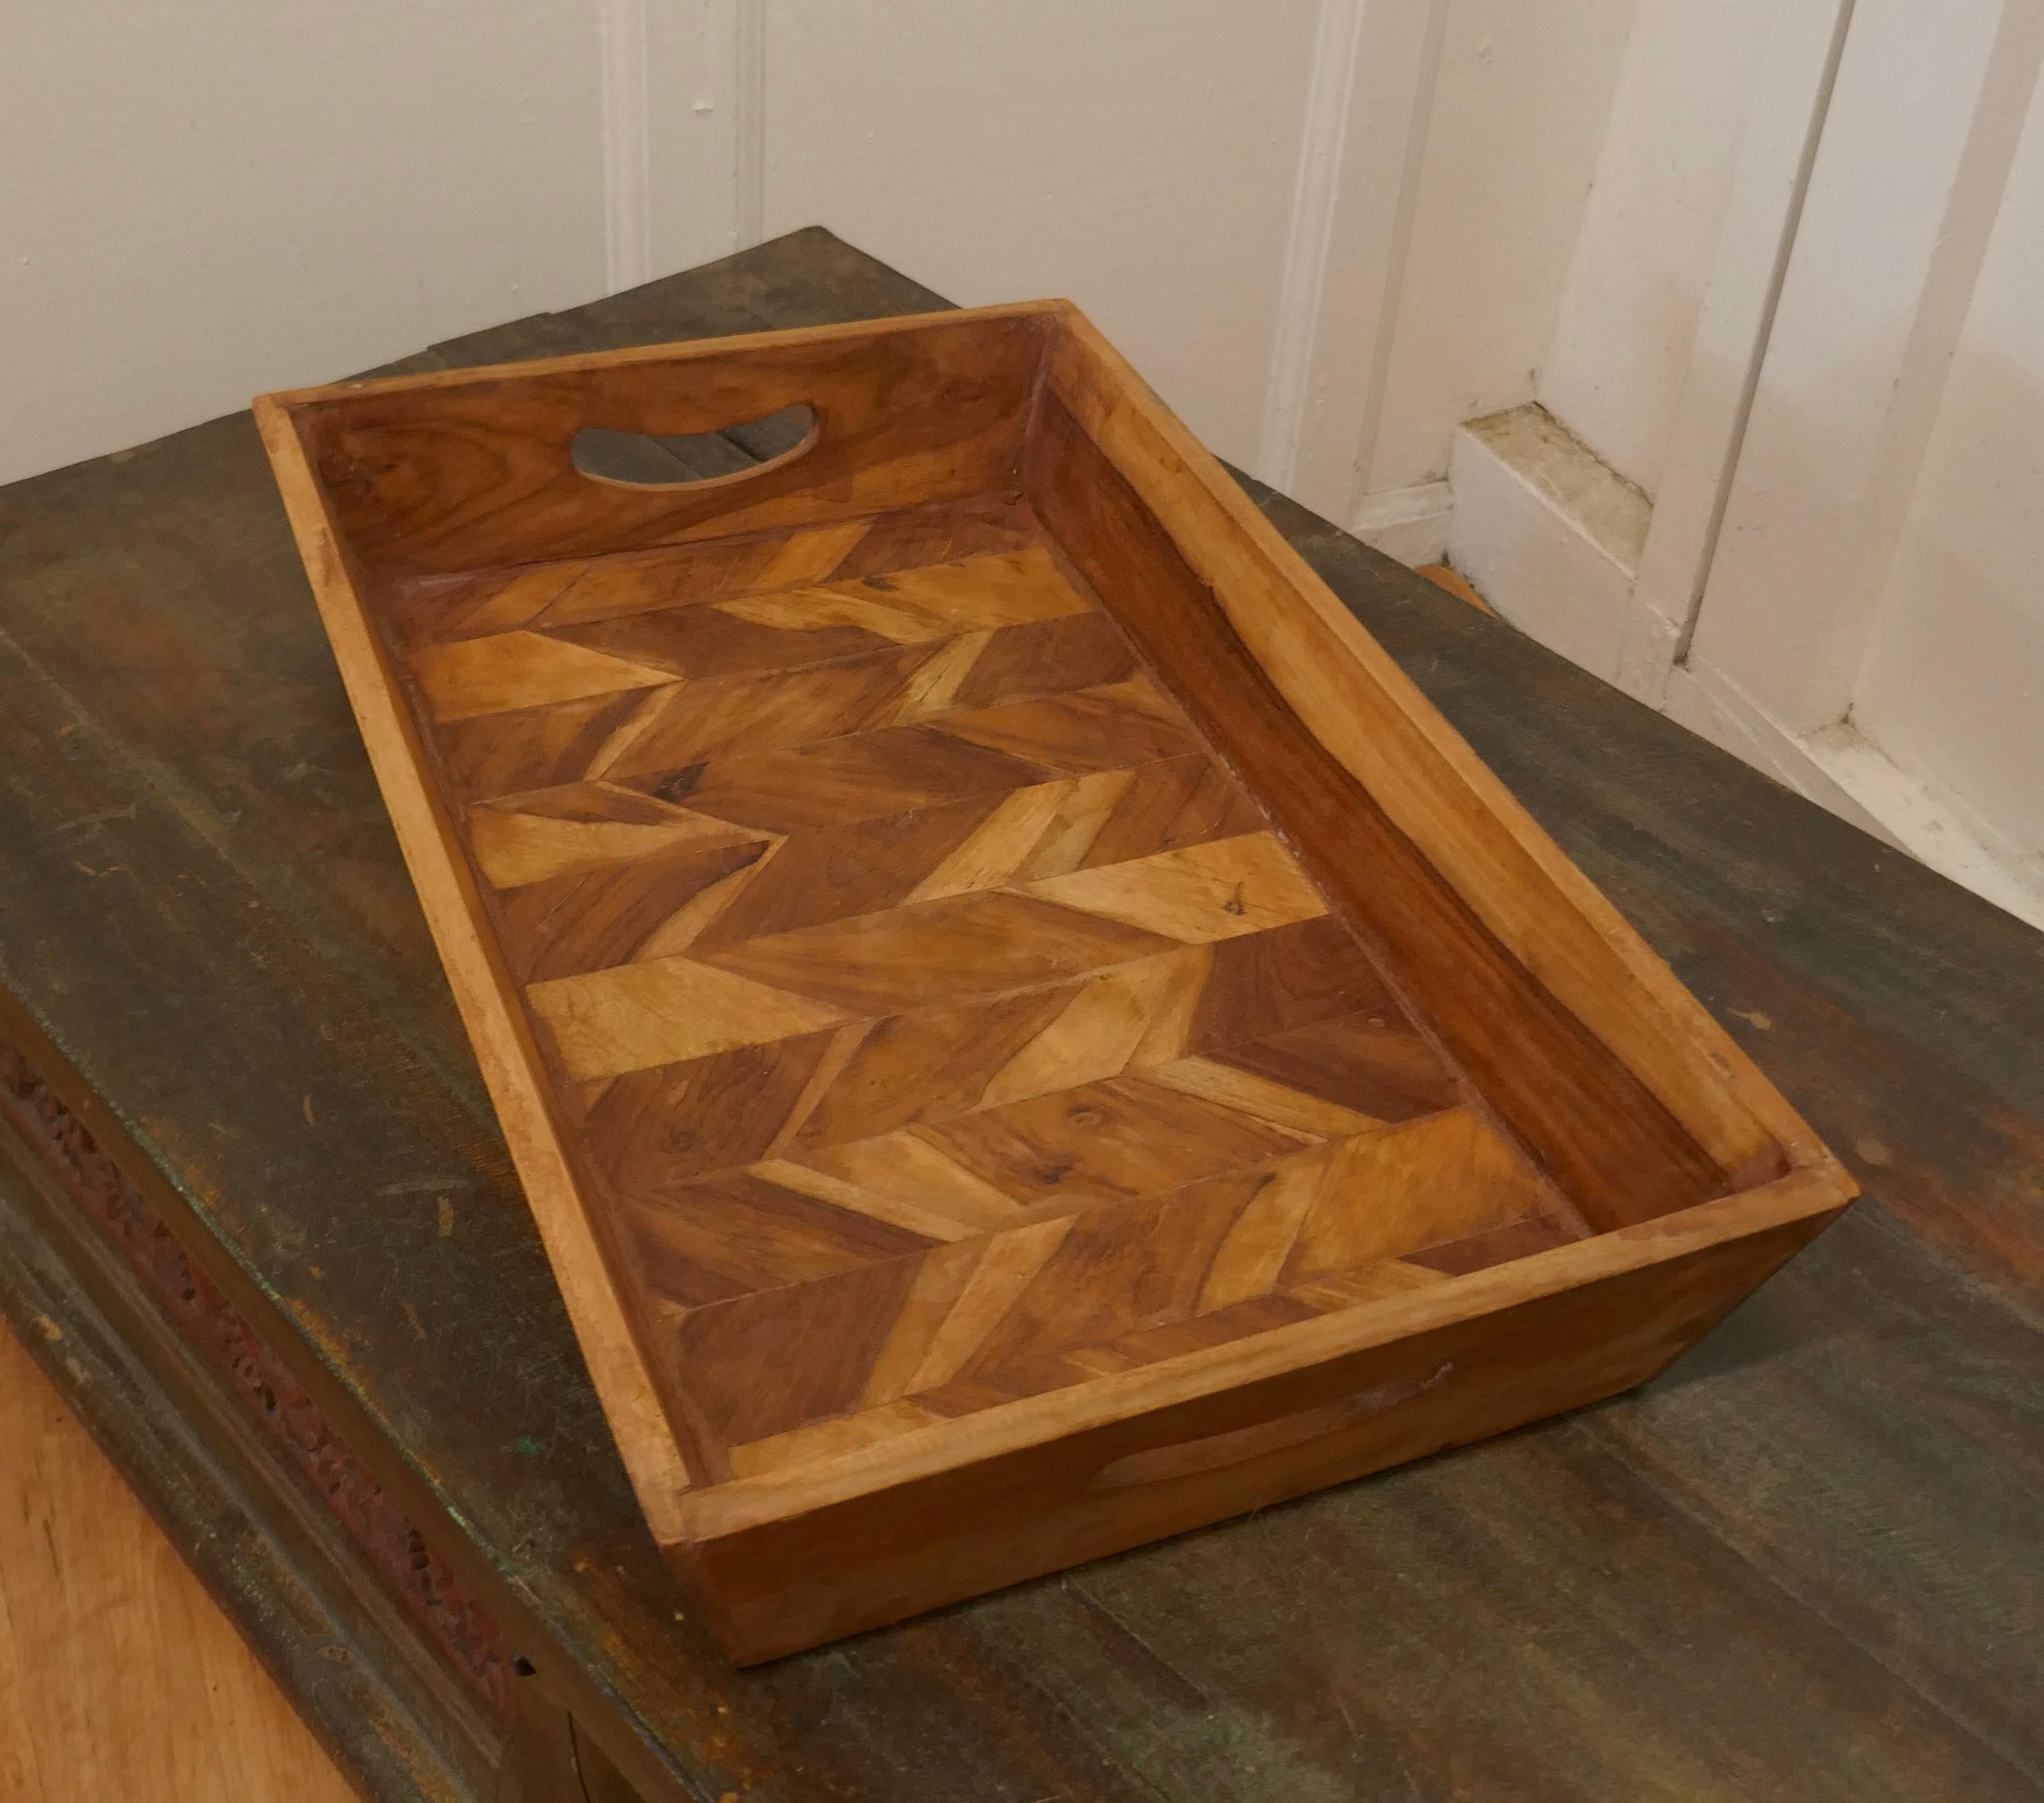 Mango wood Indian artisan country tray.

A good honest piece, the tray is made in a marquetry of Mango Wood, it has a raised gallery and inset carrying handles
A great piece in good condition.
The tray is 4” high, 21” long and 13” across.
TAC171